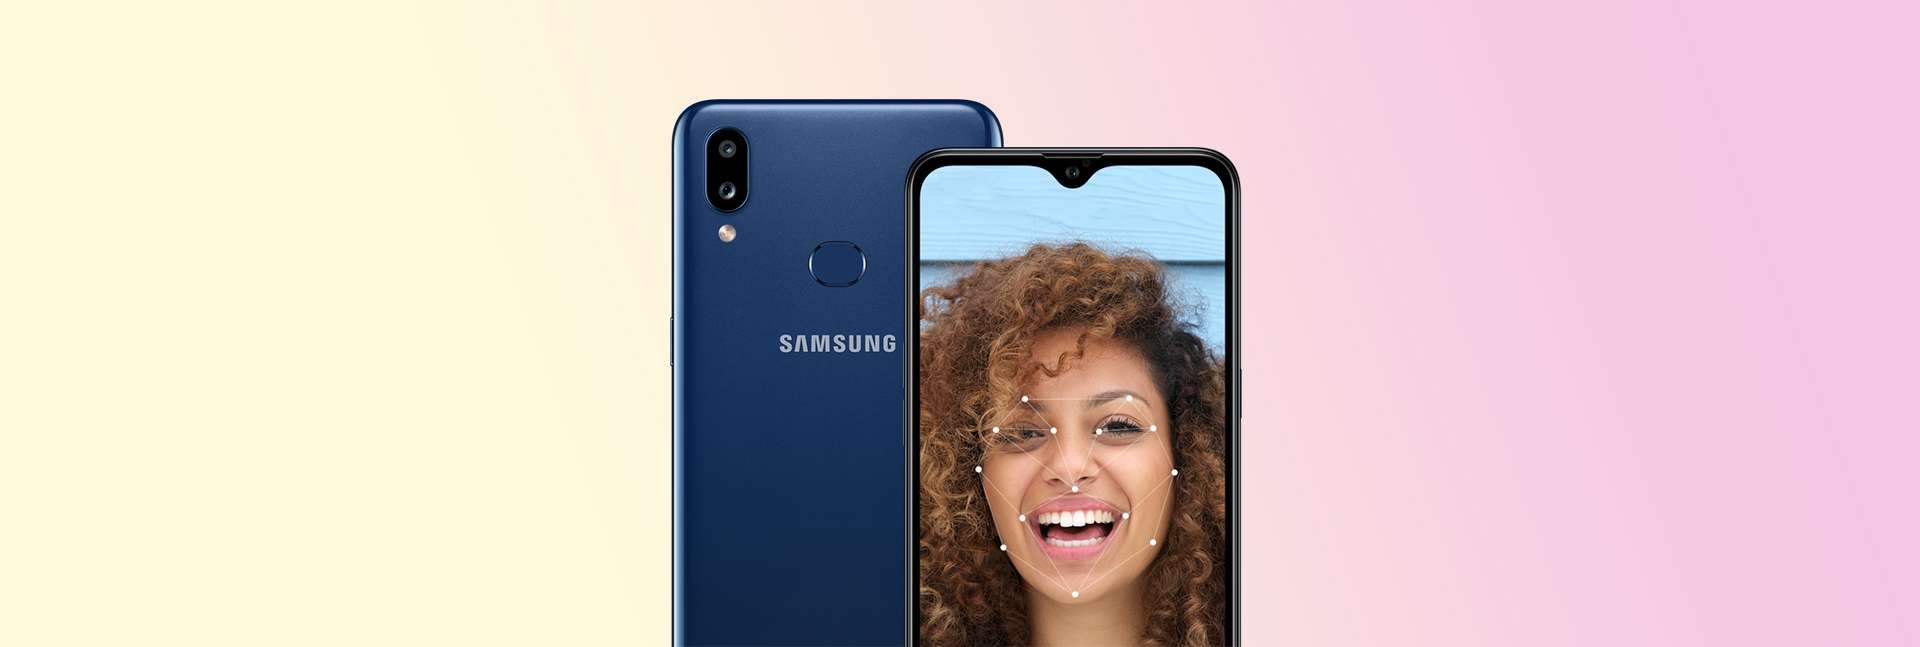 Samsung Galaxy A10s - Specs and Features | Samsung India